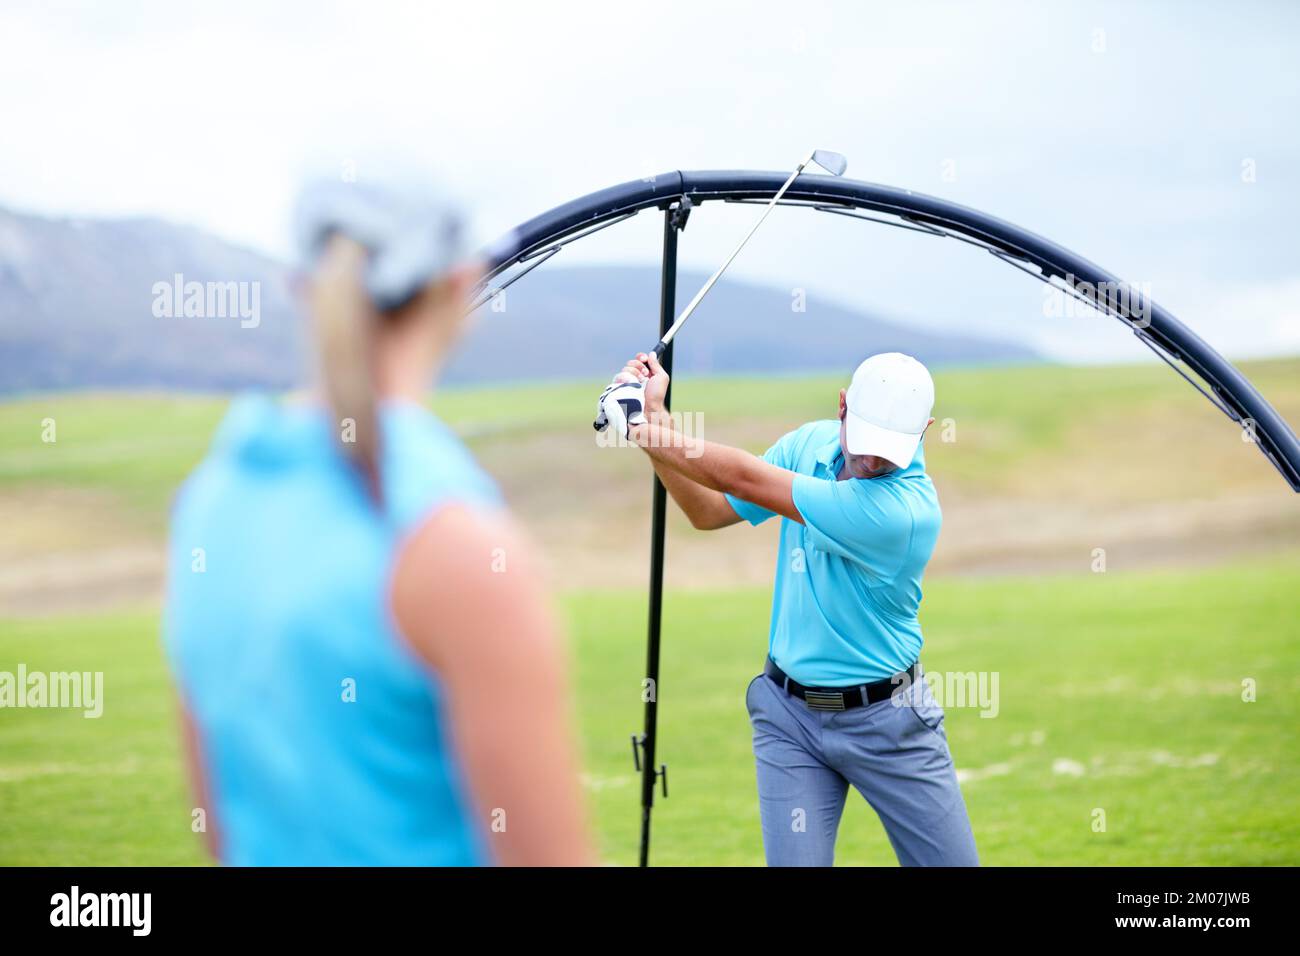 Ensuring she learns the perfect swing. Cropped image of a male coach instructing his female student using a ring to adjust and correct her swing. Stock Photo